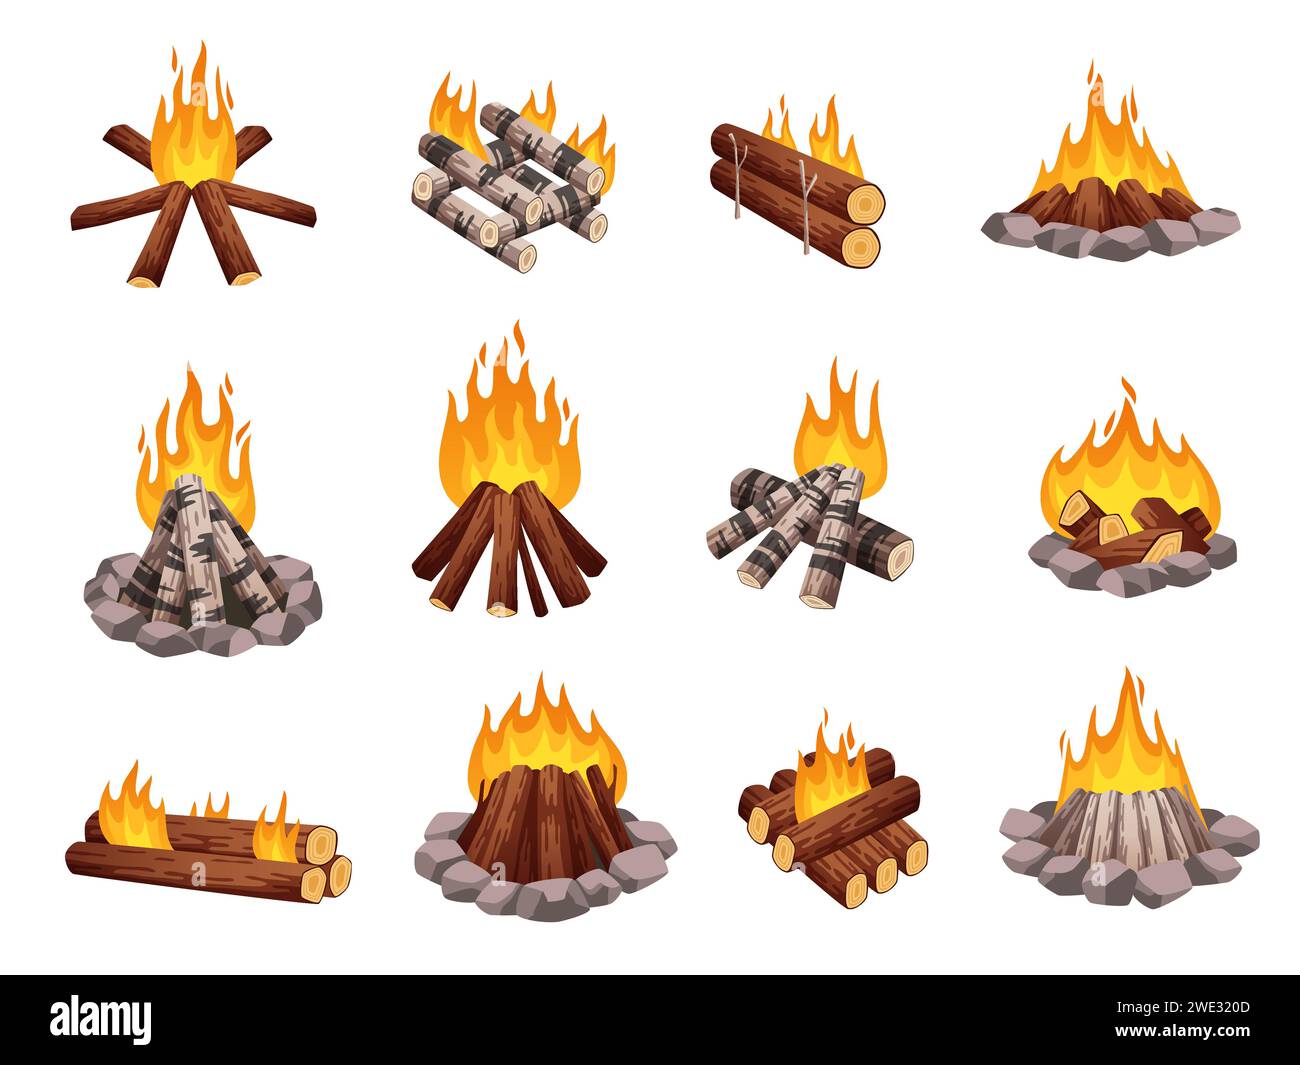 Bonfires types. Different ways of laying logs in campfires, woodpile made various trees, burning wood stack, flame igniting, cartoon flat isolated Stock Vector